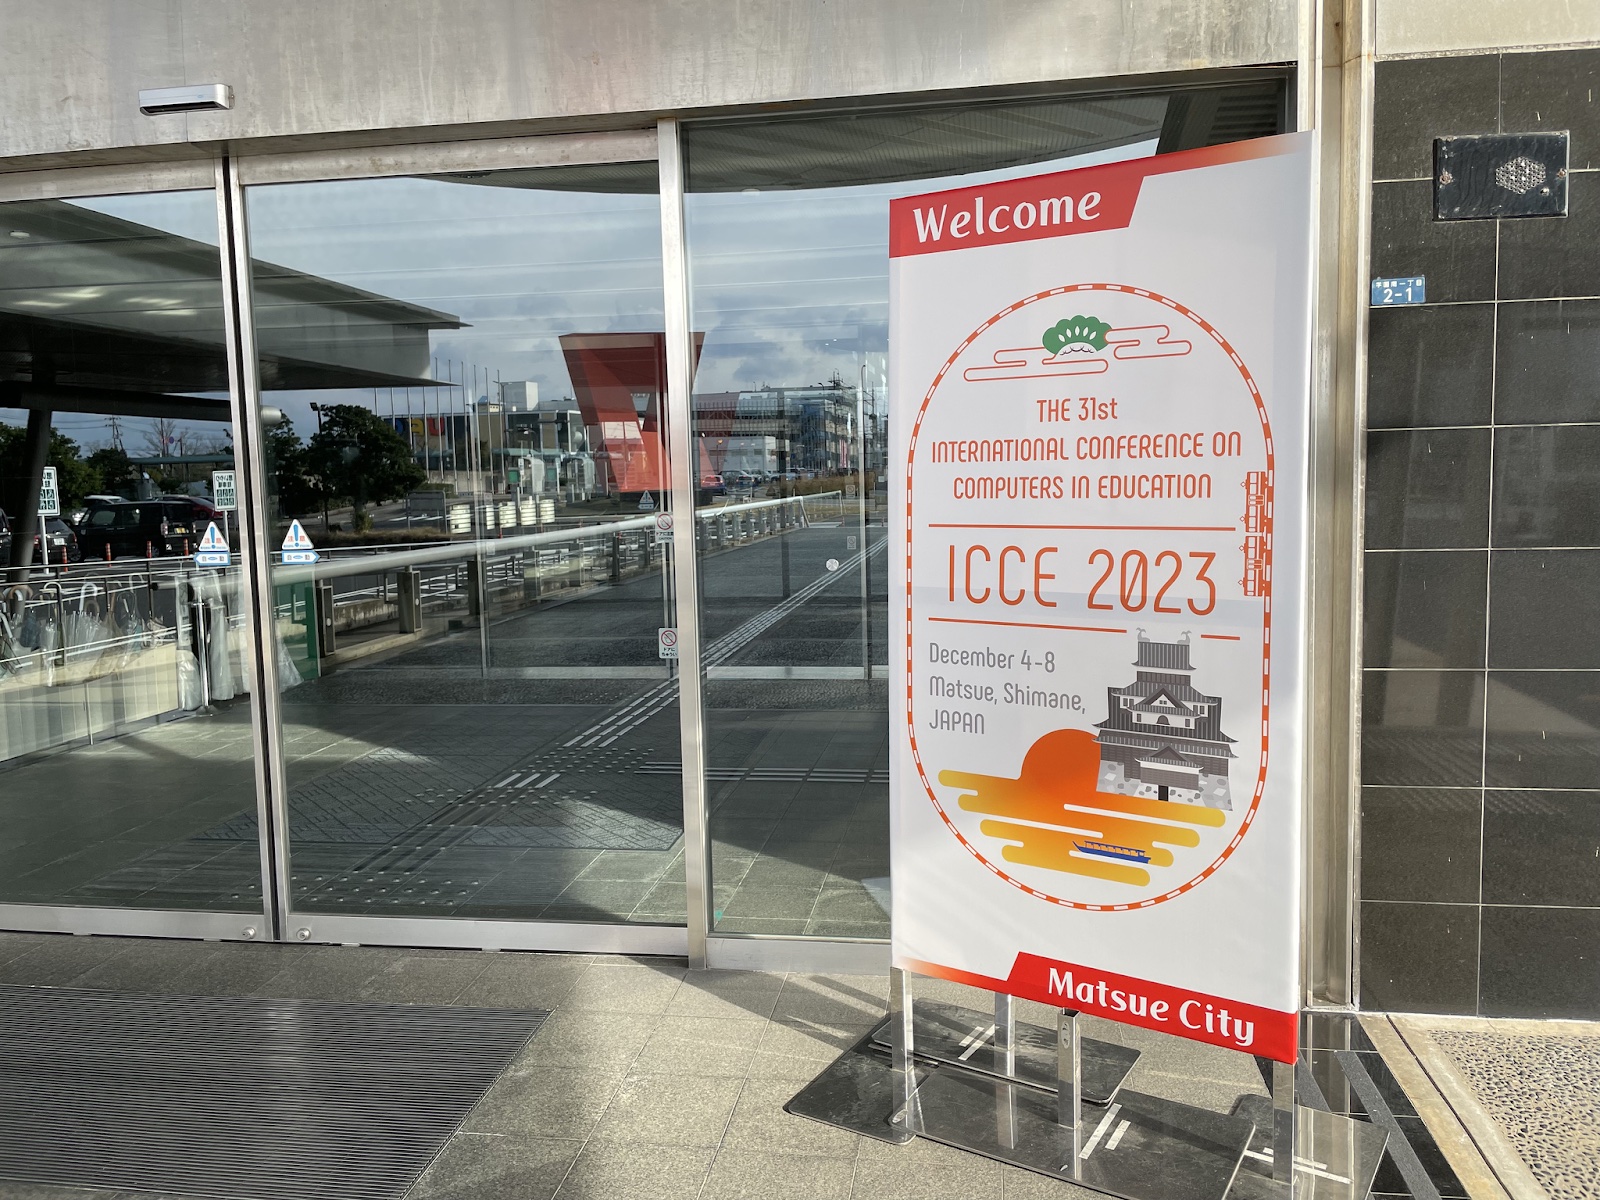 RemixED research presented at ICCE 2023 in Japan